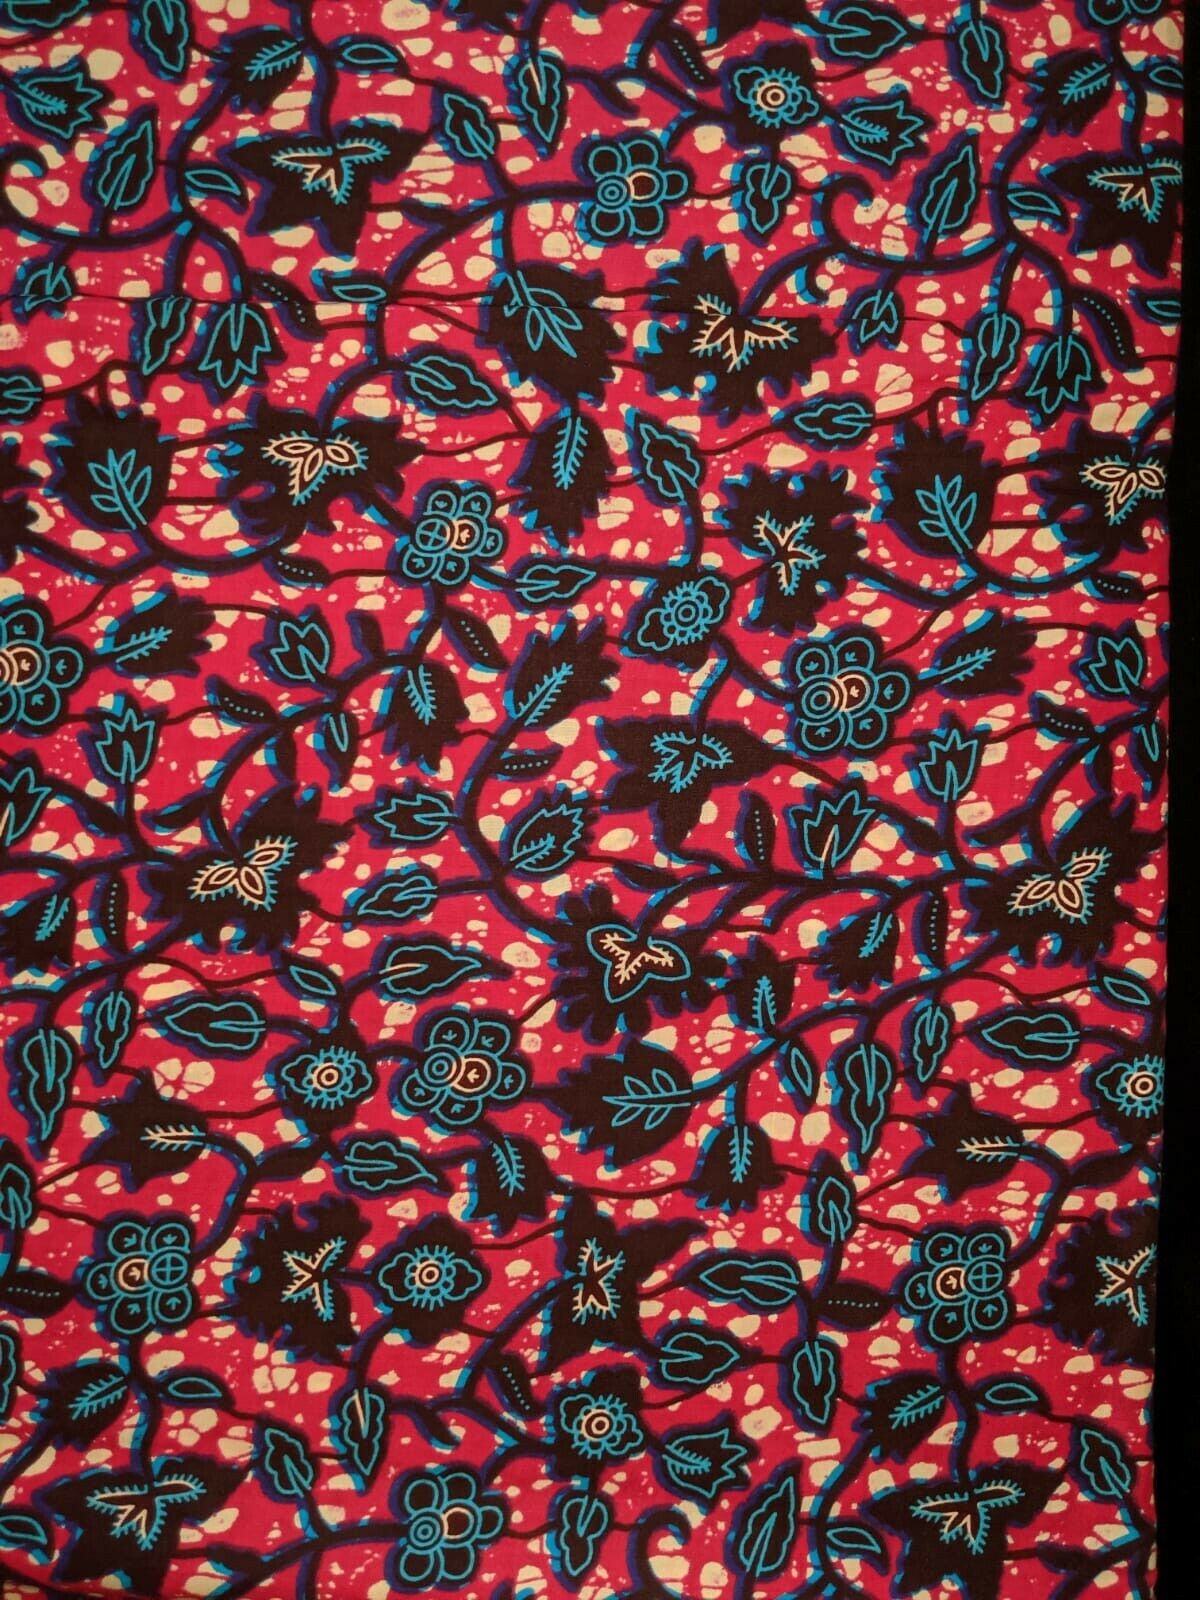 MULTICOLOR African Wax Print 100% Cotton Fabric (44 in.) 3yrds $15.75